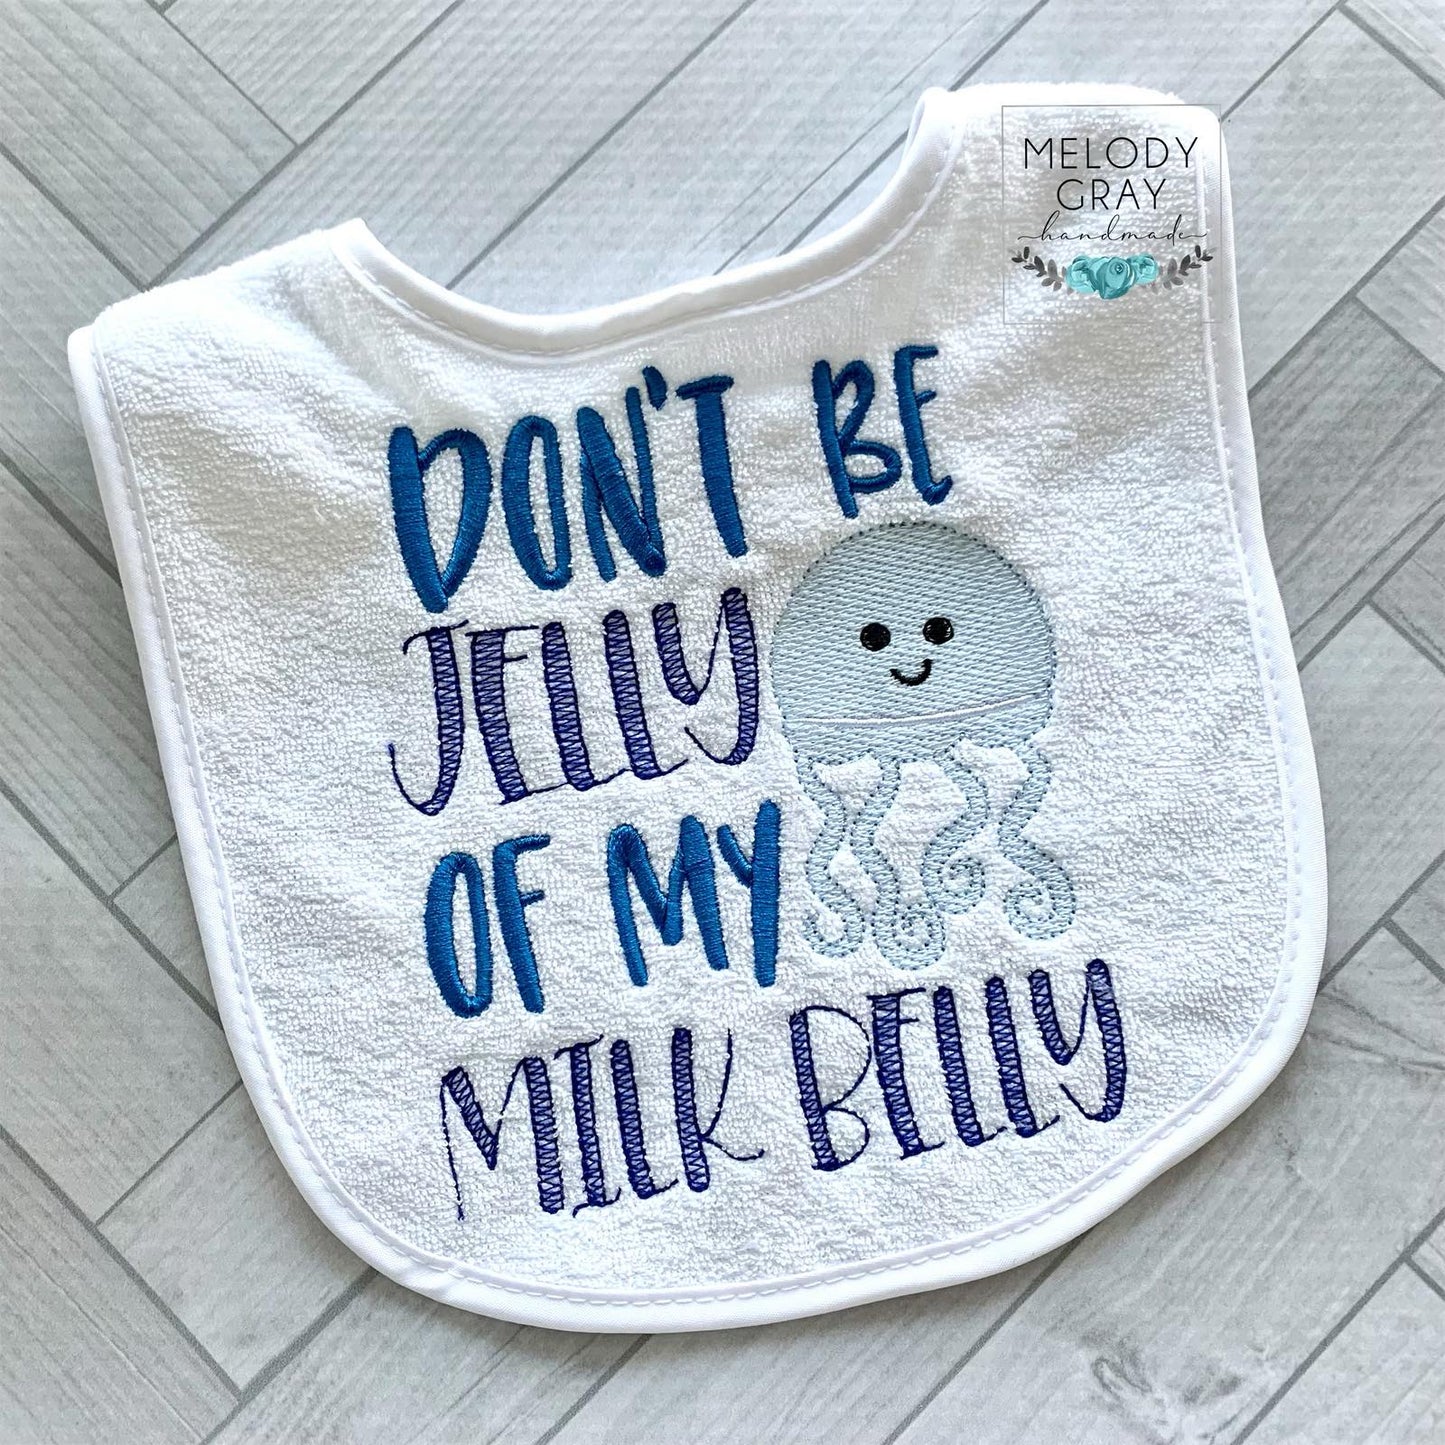 Jelly Milk Belly - 3 sizes- Digital Embroidery Design